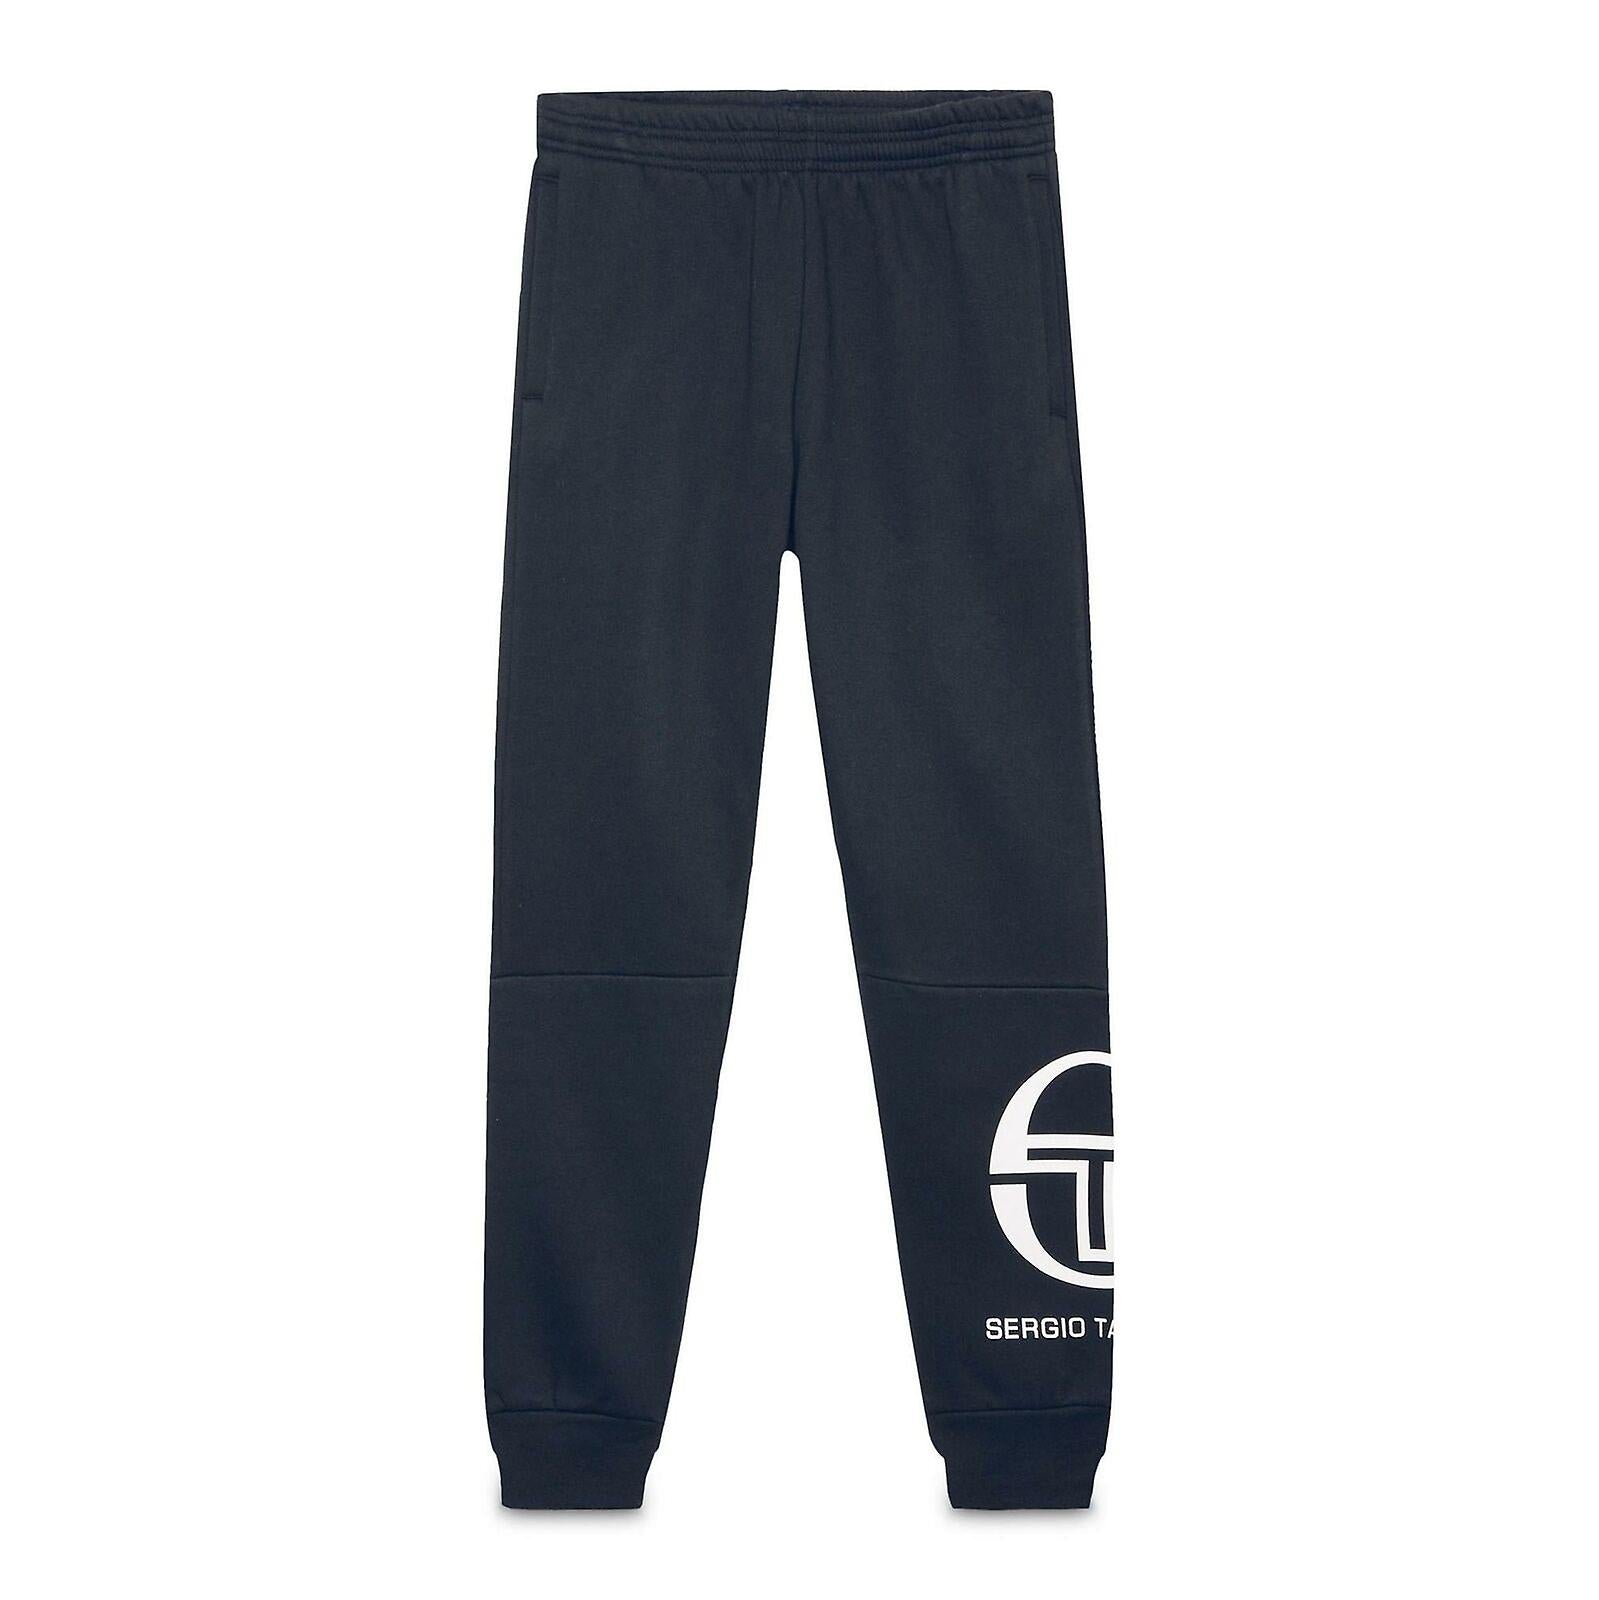 Sergio Tacchini Mens Chalmers Track Pants Casual Lounge Joggers 038339-200